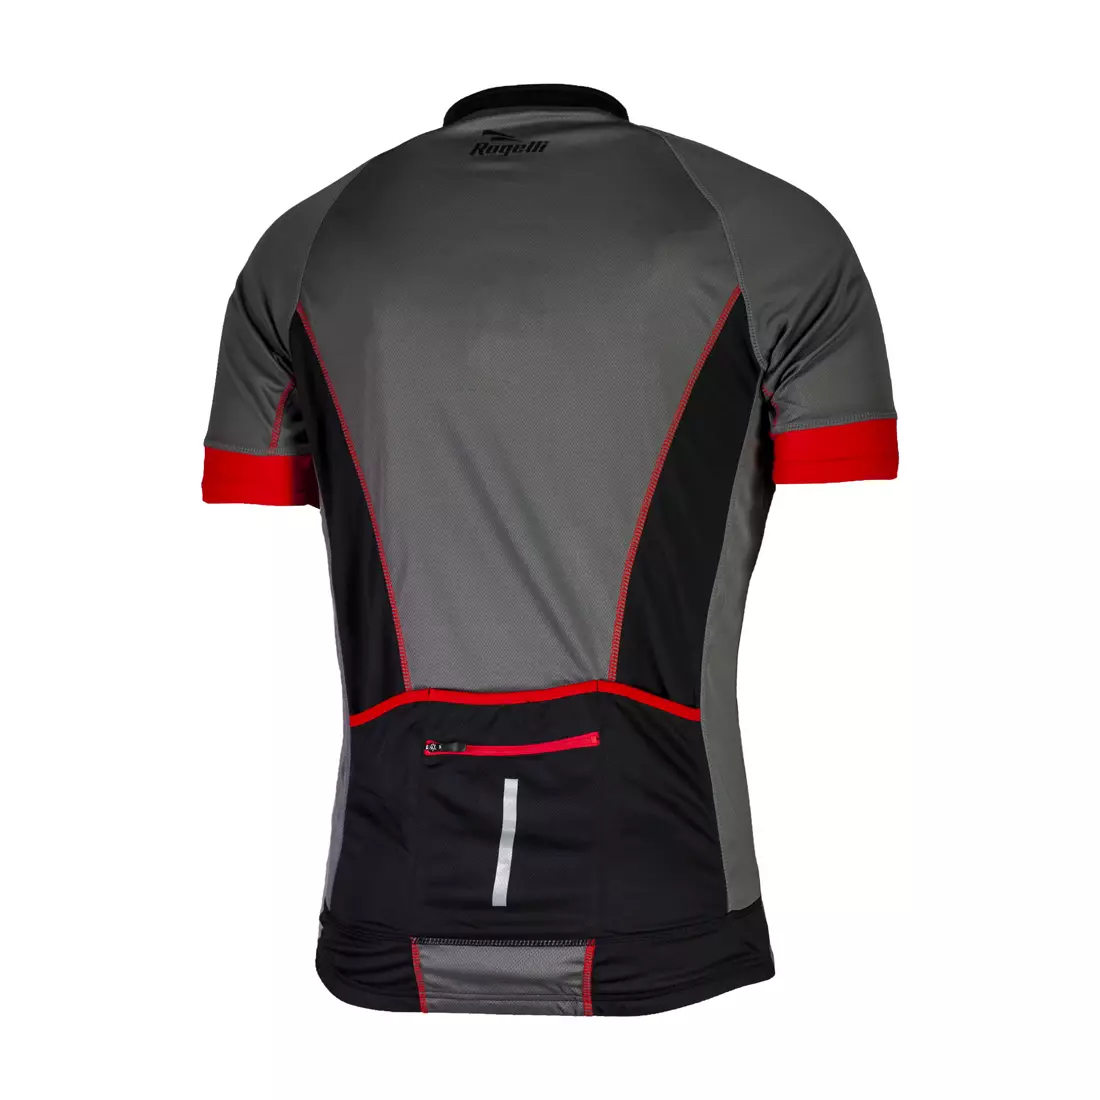 ROGELLI MANTUA - men's cycling jersey 001.062, black and red